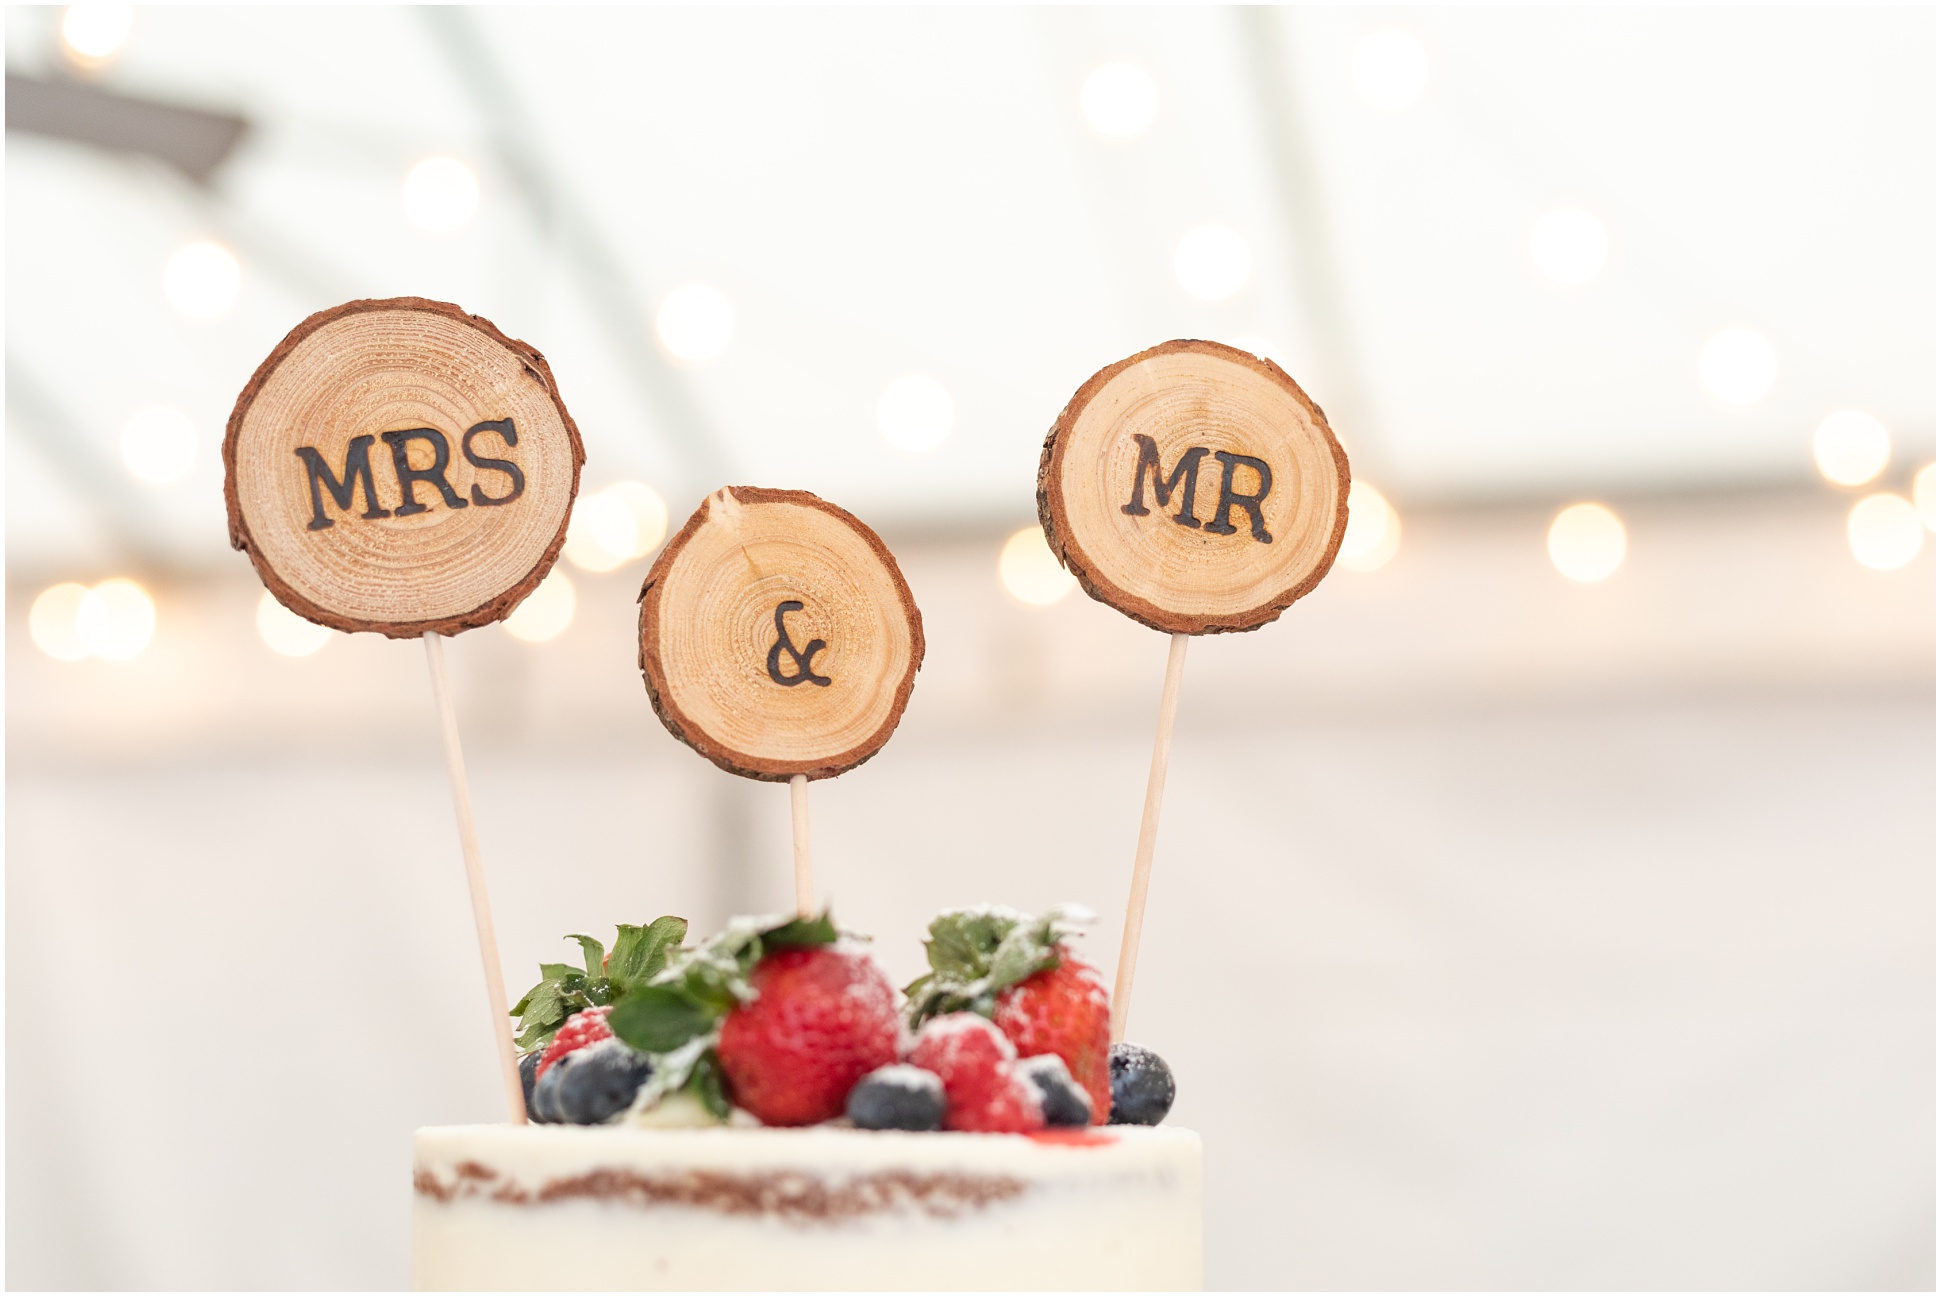 Mr and Mrs Cake Toppers ontop of cake with fresh straweberries and blueberries